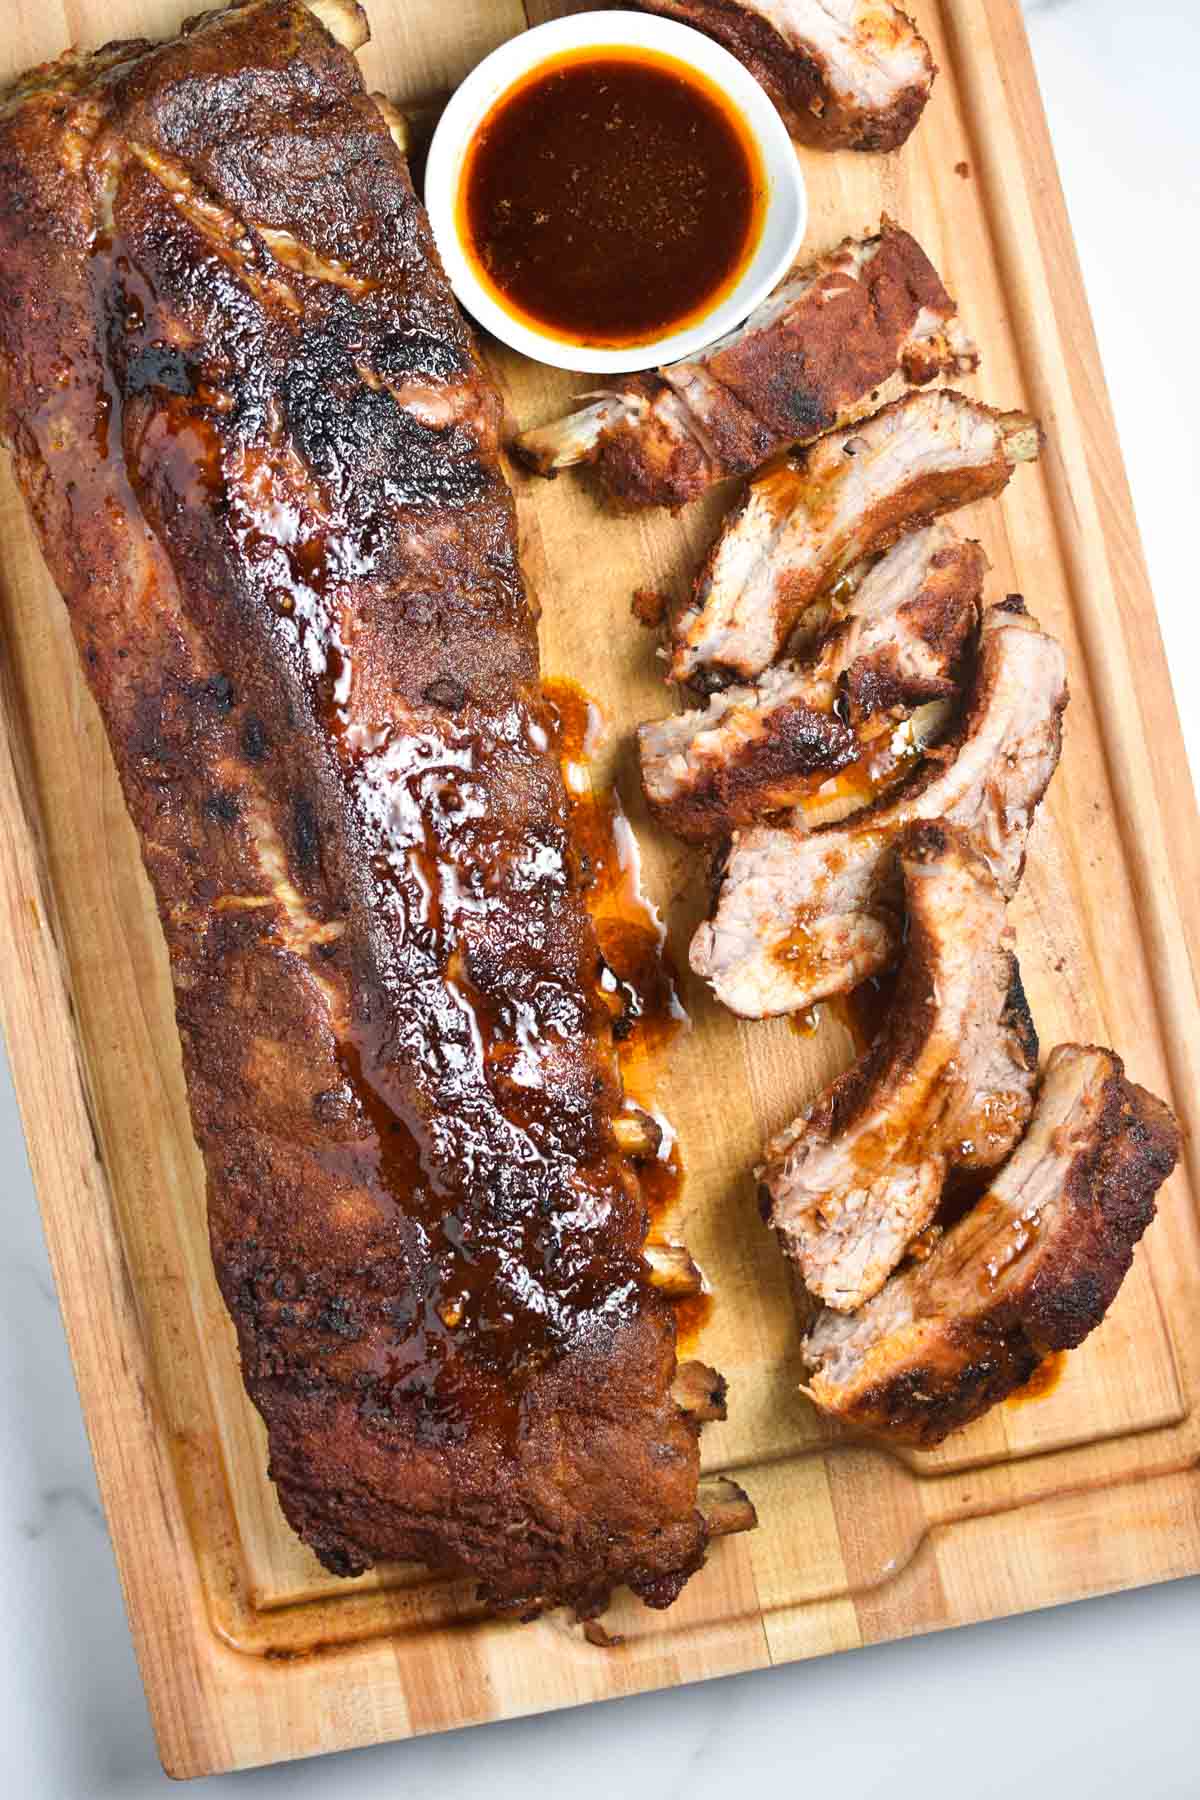 A whole rack of dry rub oven ribs next to sliced ribs and bbq sauce on a wooden board